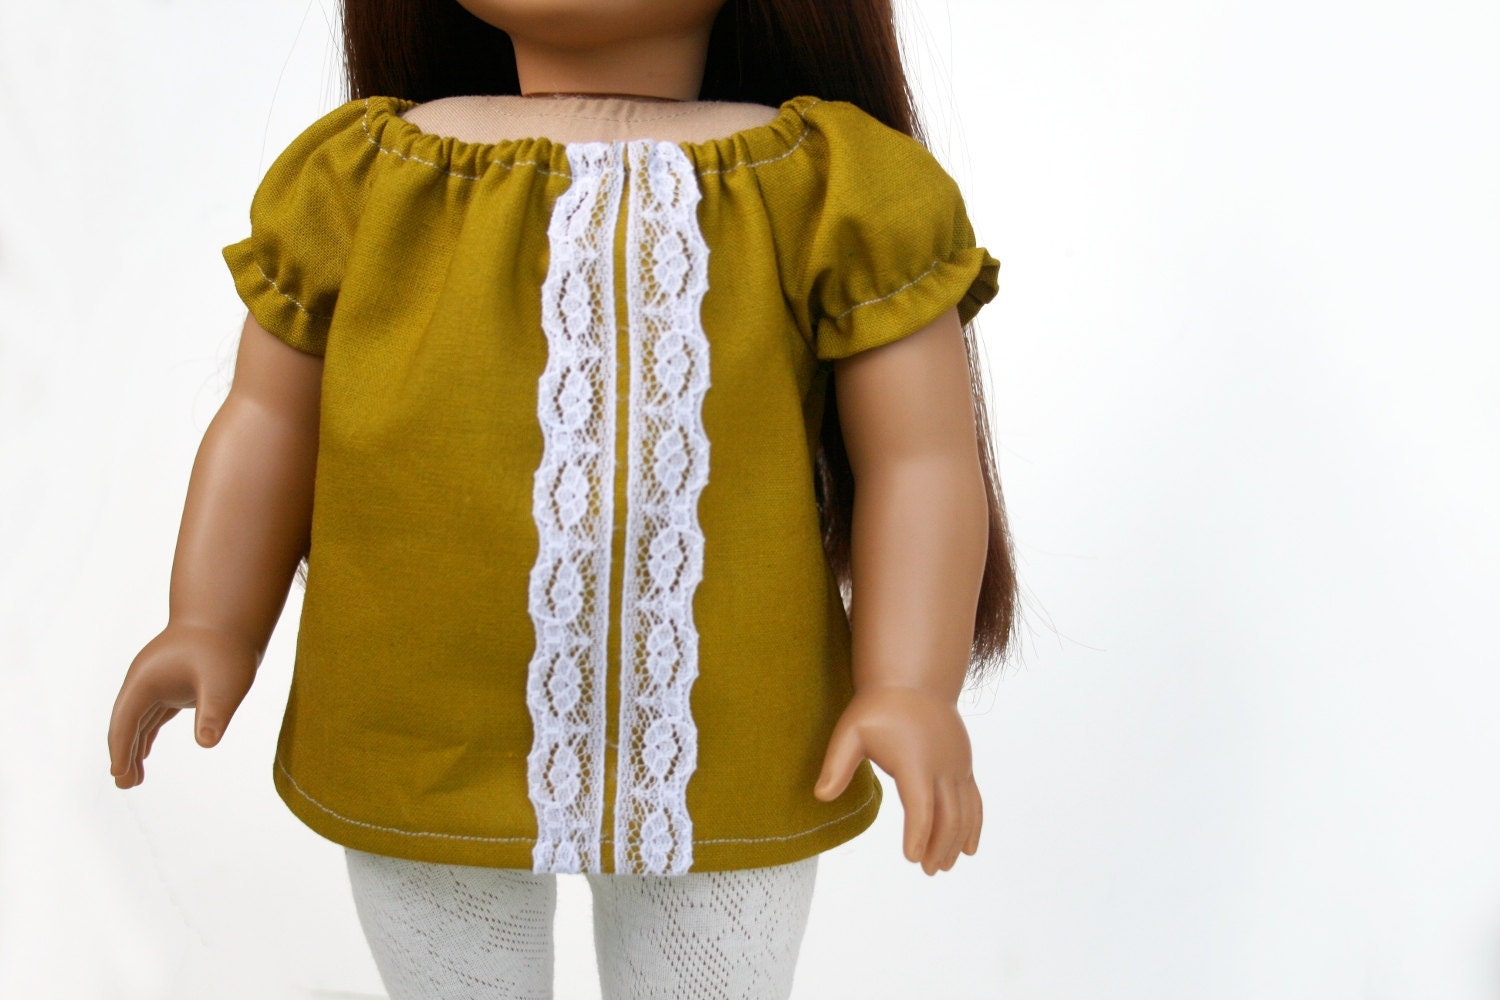 American Girl Doll Clothes - A Peasant Top in Echino Green, Made To Order